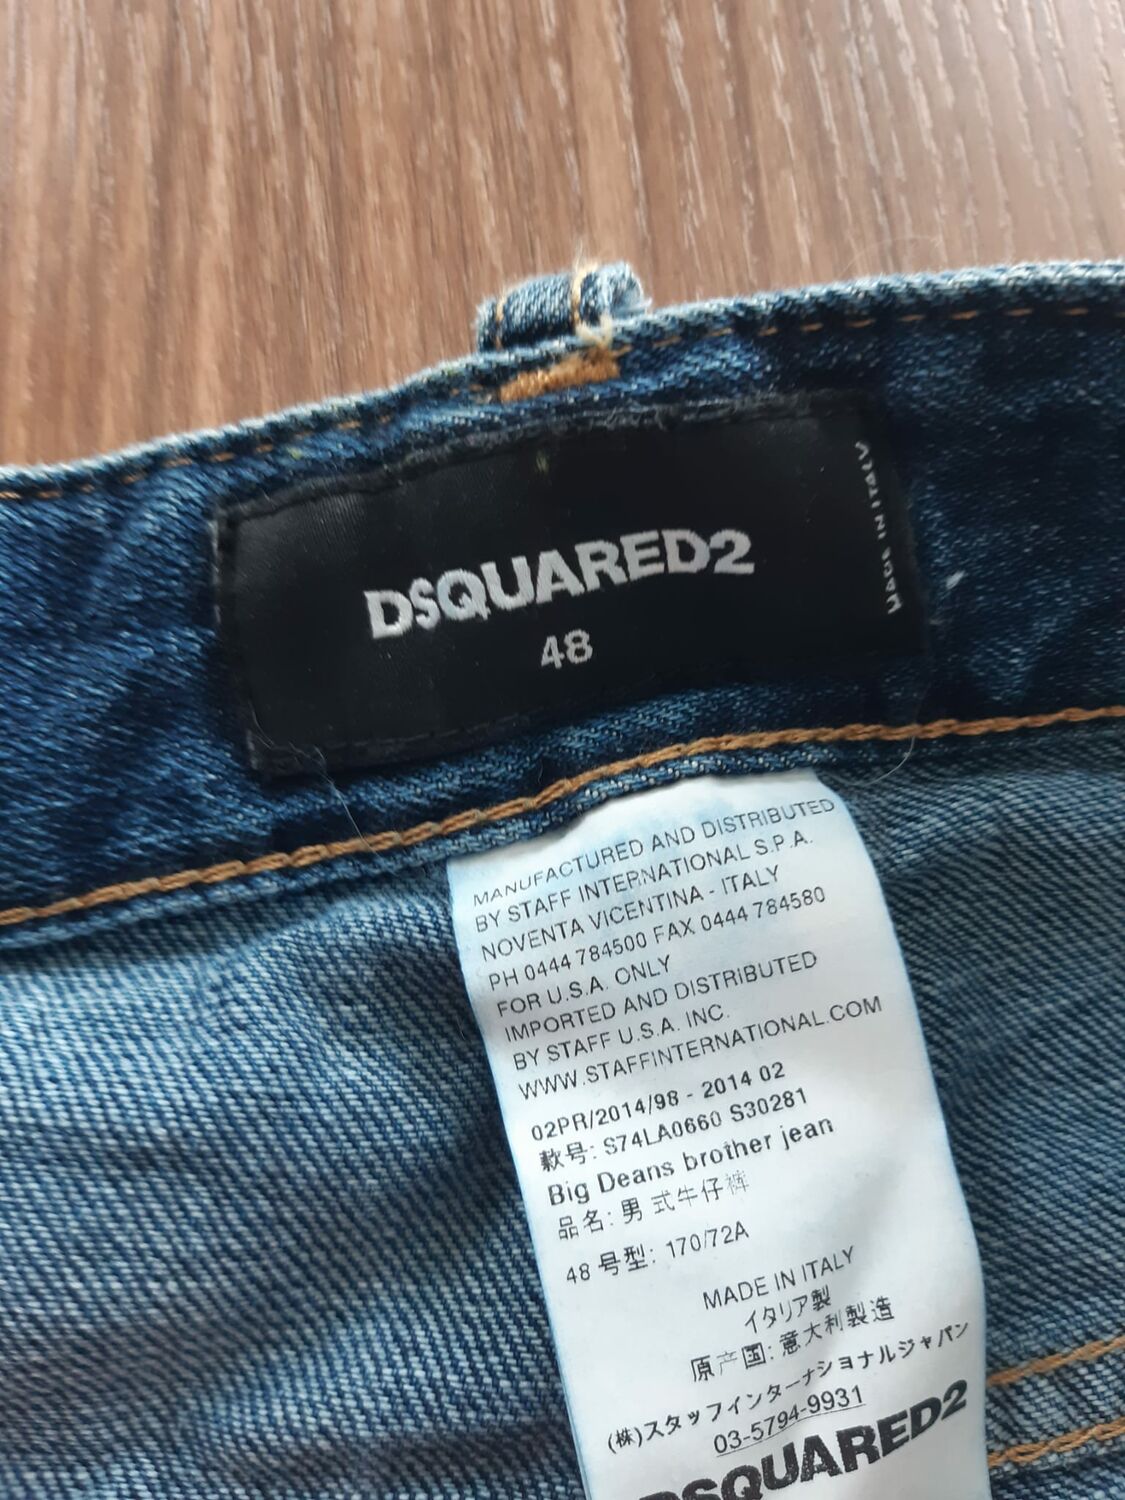 Relaxed fit Jeans Dsquared2 - IT 48, buy pre-owned at 250 EUR